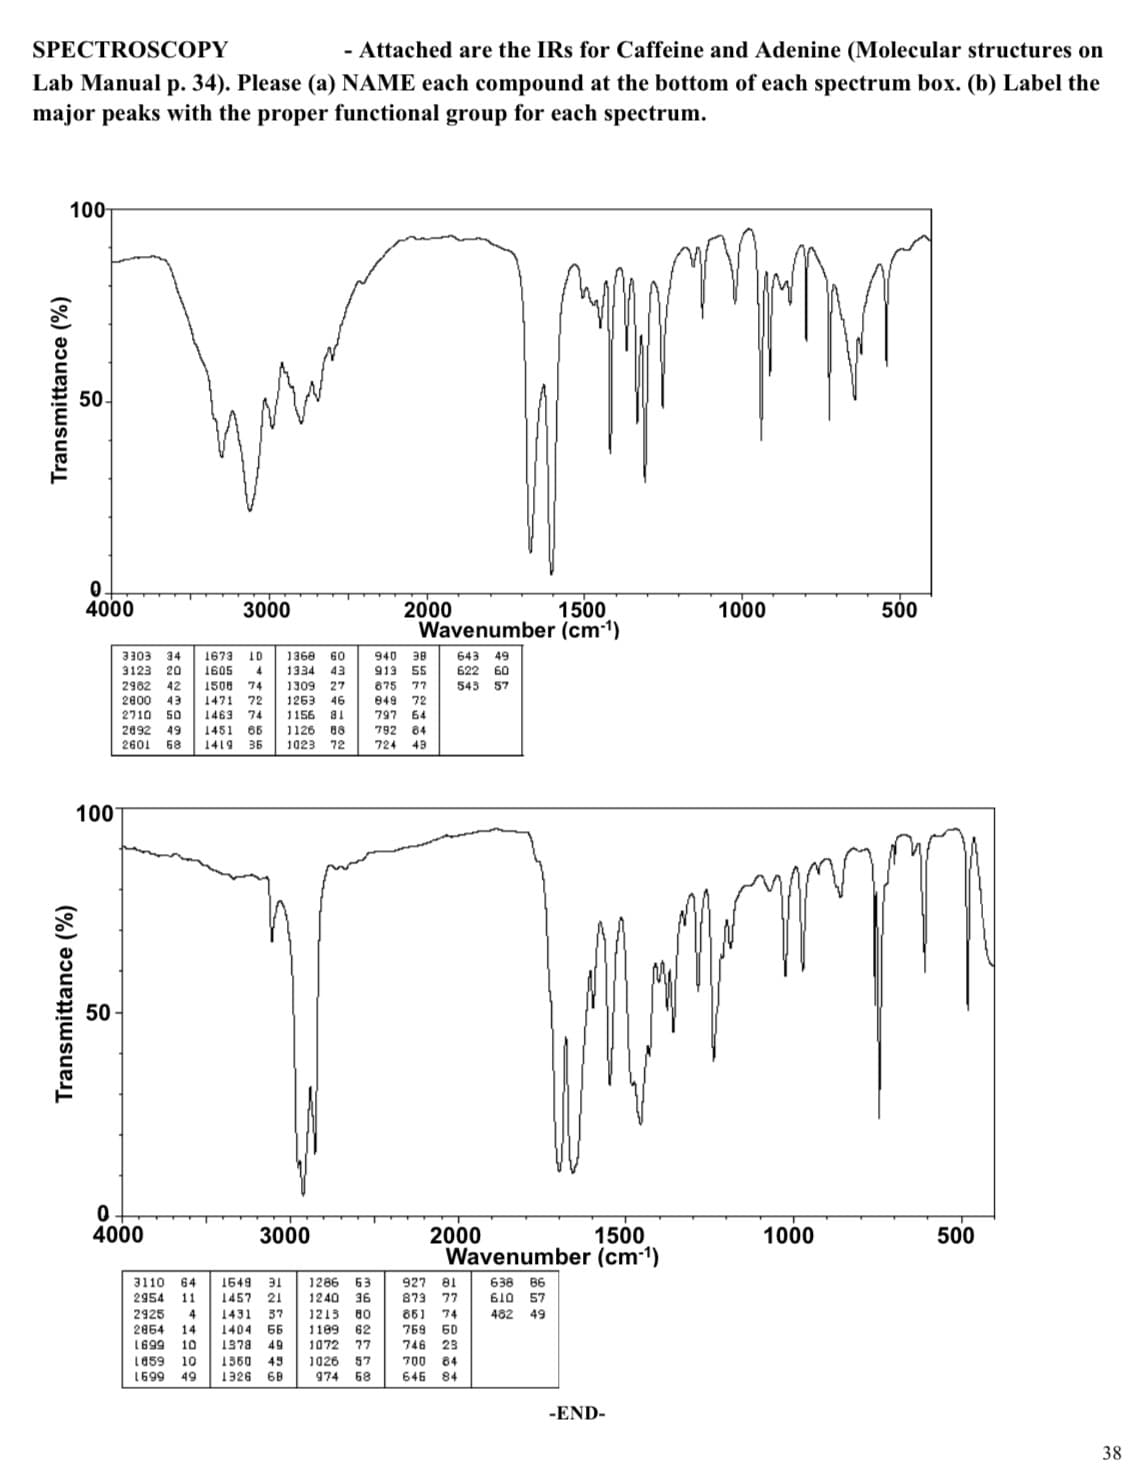 SPECTROSCOPY
- Attached are the IRs for Caffeine and Adenine (Molecular structures on
Lab Manual p. 34). Please (a) NAME each compound at the bottom of each spectrum box. (b) Label the
major peaks with the proper functional group for each spectrum.
100-
Transmittance (%)
Transmittance (%)
50-
4000
100
50
3303 34 1673 10
3123 20 1605 4
2982 42 1508 74
2800 43
1471
72
2710 50 1463 74
2892 49 1451 65
2601 68 1419 36
0
4000
3000
2925 4
2854 14
1699 10
1859 10
1699 49
3110 64 1649 31
2954 11
1457 21
1431 37
1404 56
1378 49
1360 49
1326 68
1368 60
1334 43
1309 27
1263 46
1156 81
1126 88
1023
72
3000
1286 63
1240 36
1213 80
1189 62
1072 77
1026 57
974 68
2000
1500
Wavenumber (cm-¹)
940 38
913 55
875 77
849 72
797 64
792 84
724 49
643 49
622 60
543 57
2000
1500
Wavenumber (cm-¹)
81
927
873 77
851 74
769 60
746 23
700 84
646 84
wwwm
638 86
610 57
482 49
1000
-END-
500
1000
500
38